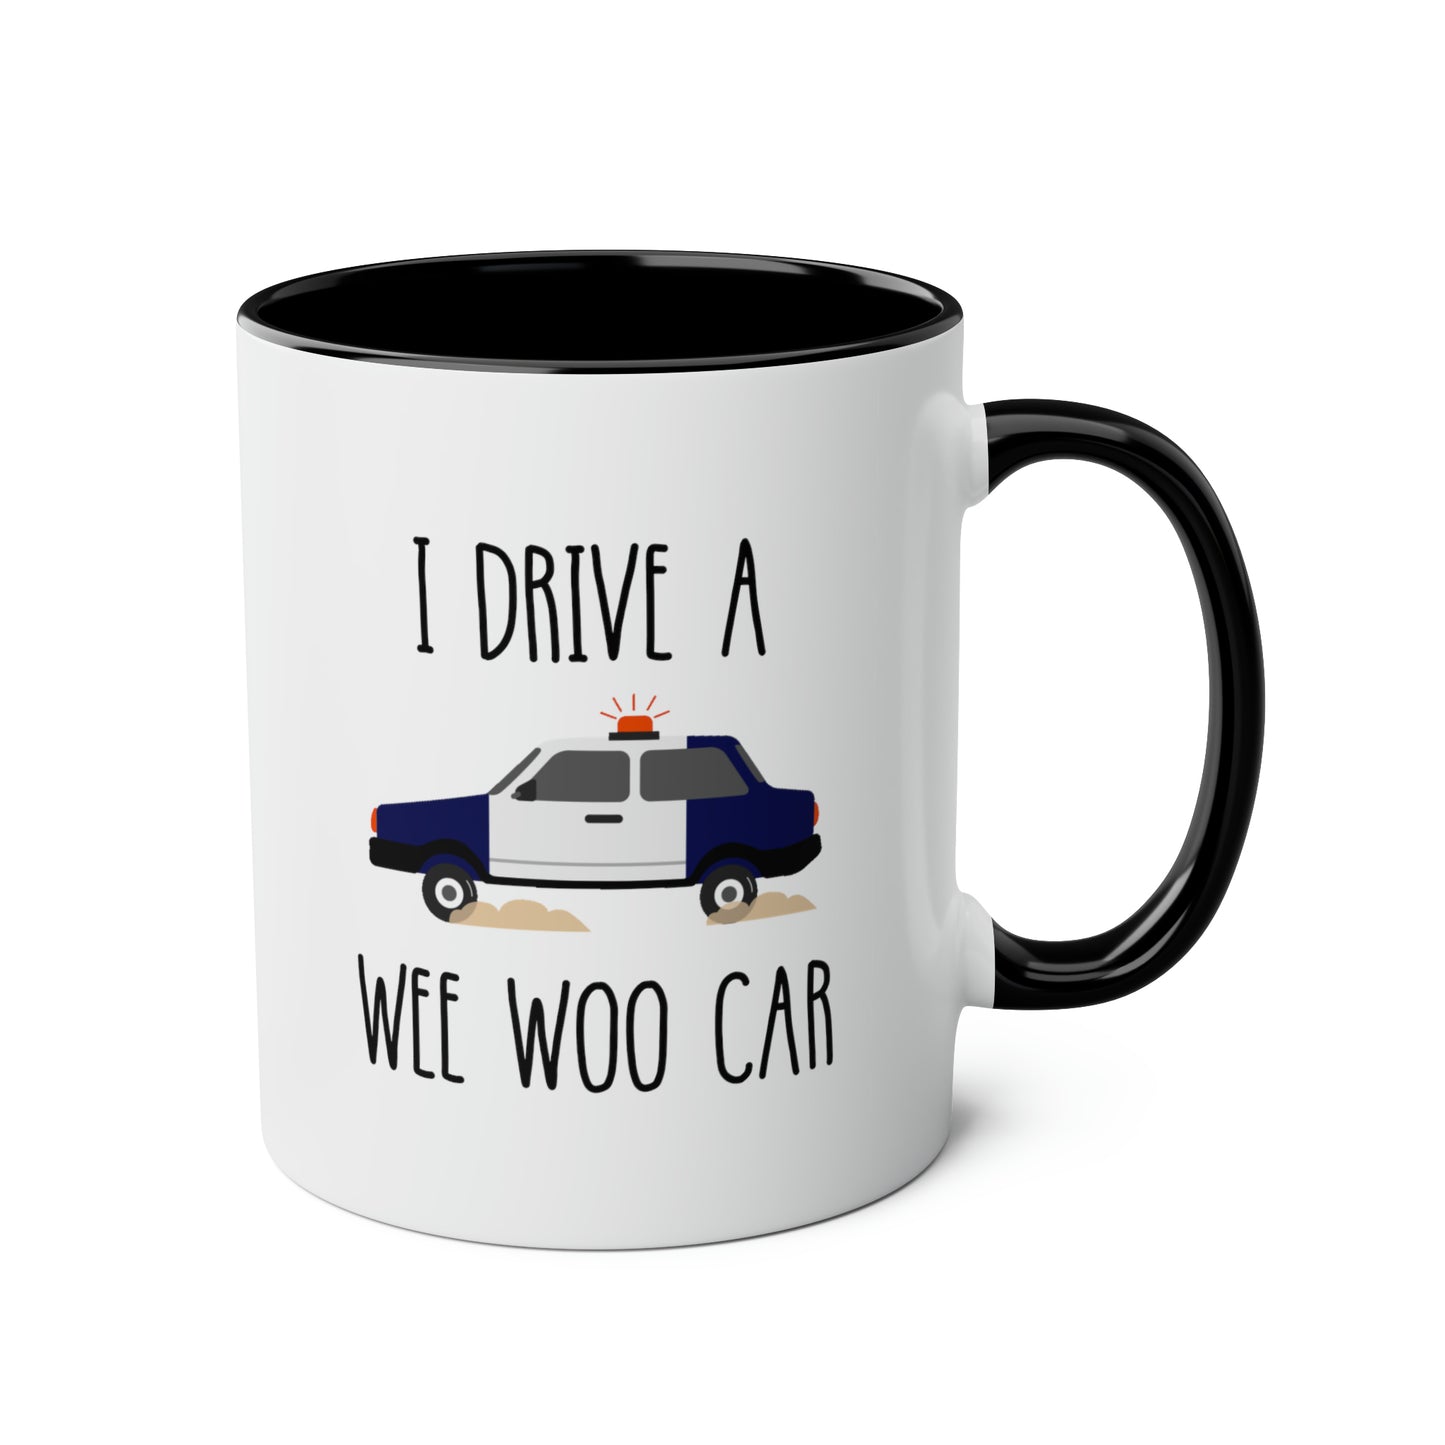 I Drive A Wee Woo Car 11oz white with black accent funny large coffee mug gift for police cop officer graduation birthday waveywares wavey wares wavywares wavy wares